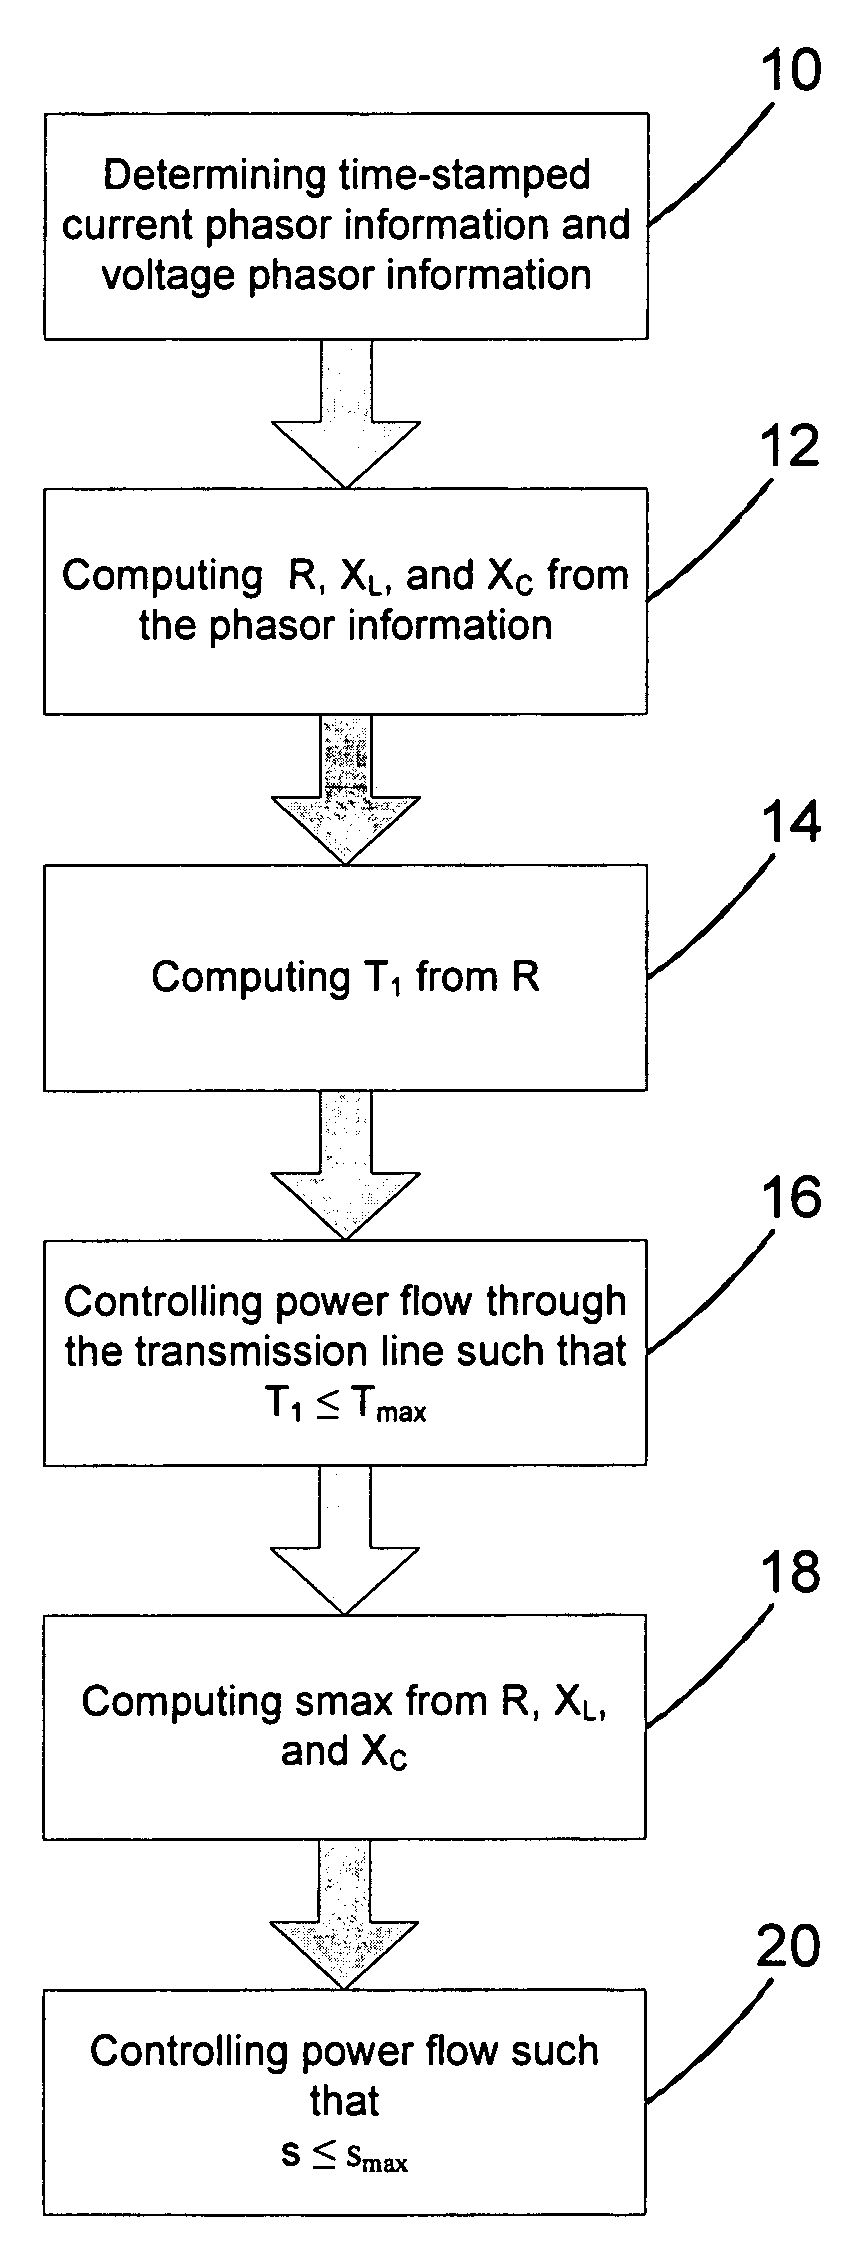 Determining an operational limit of a power transmission line